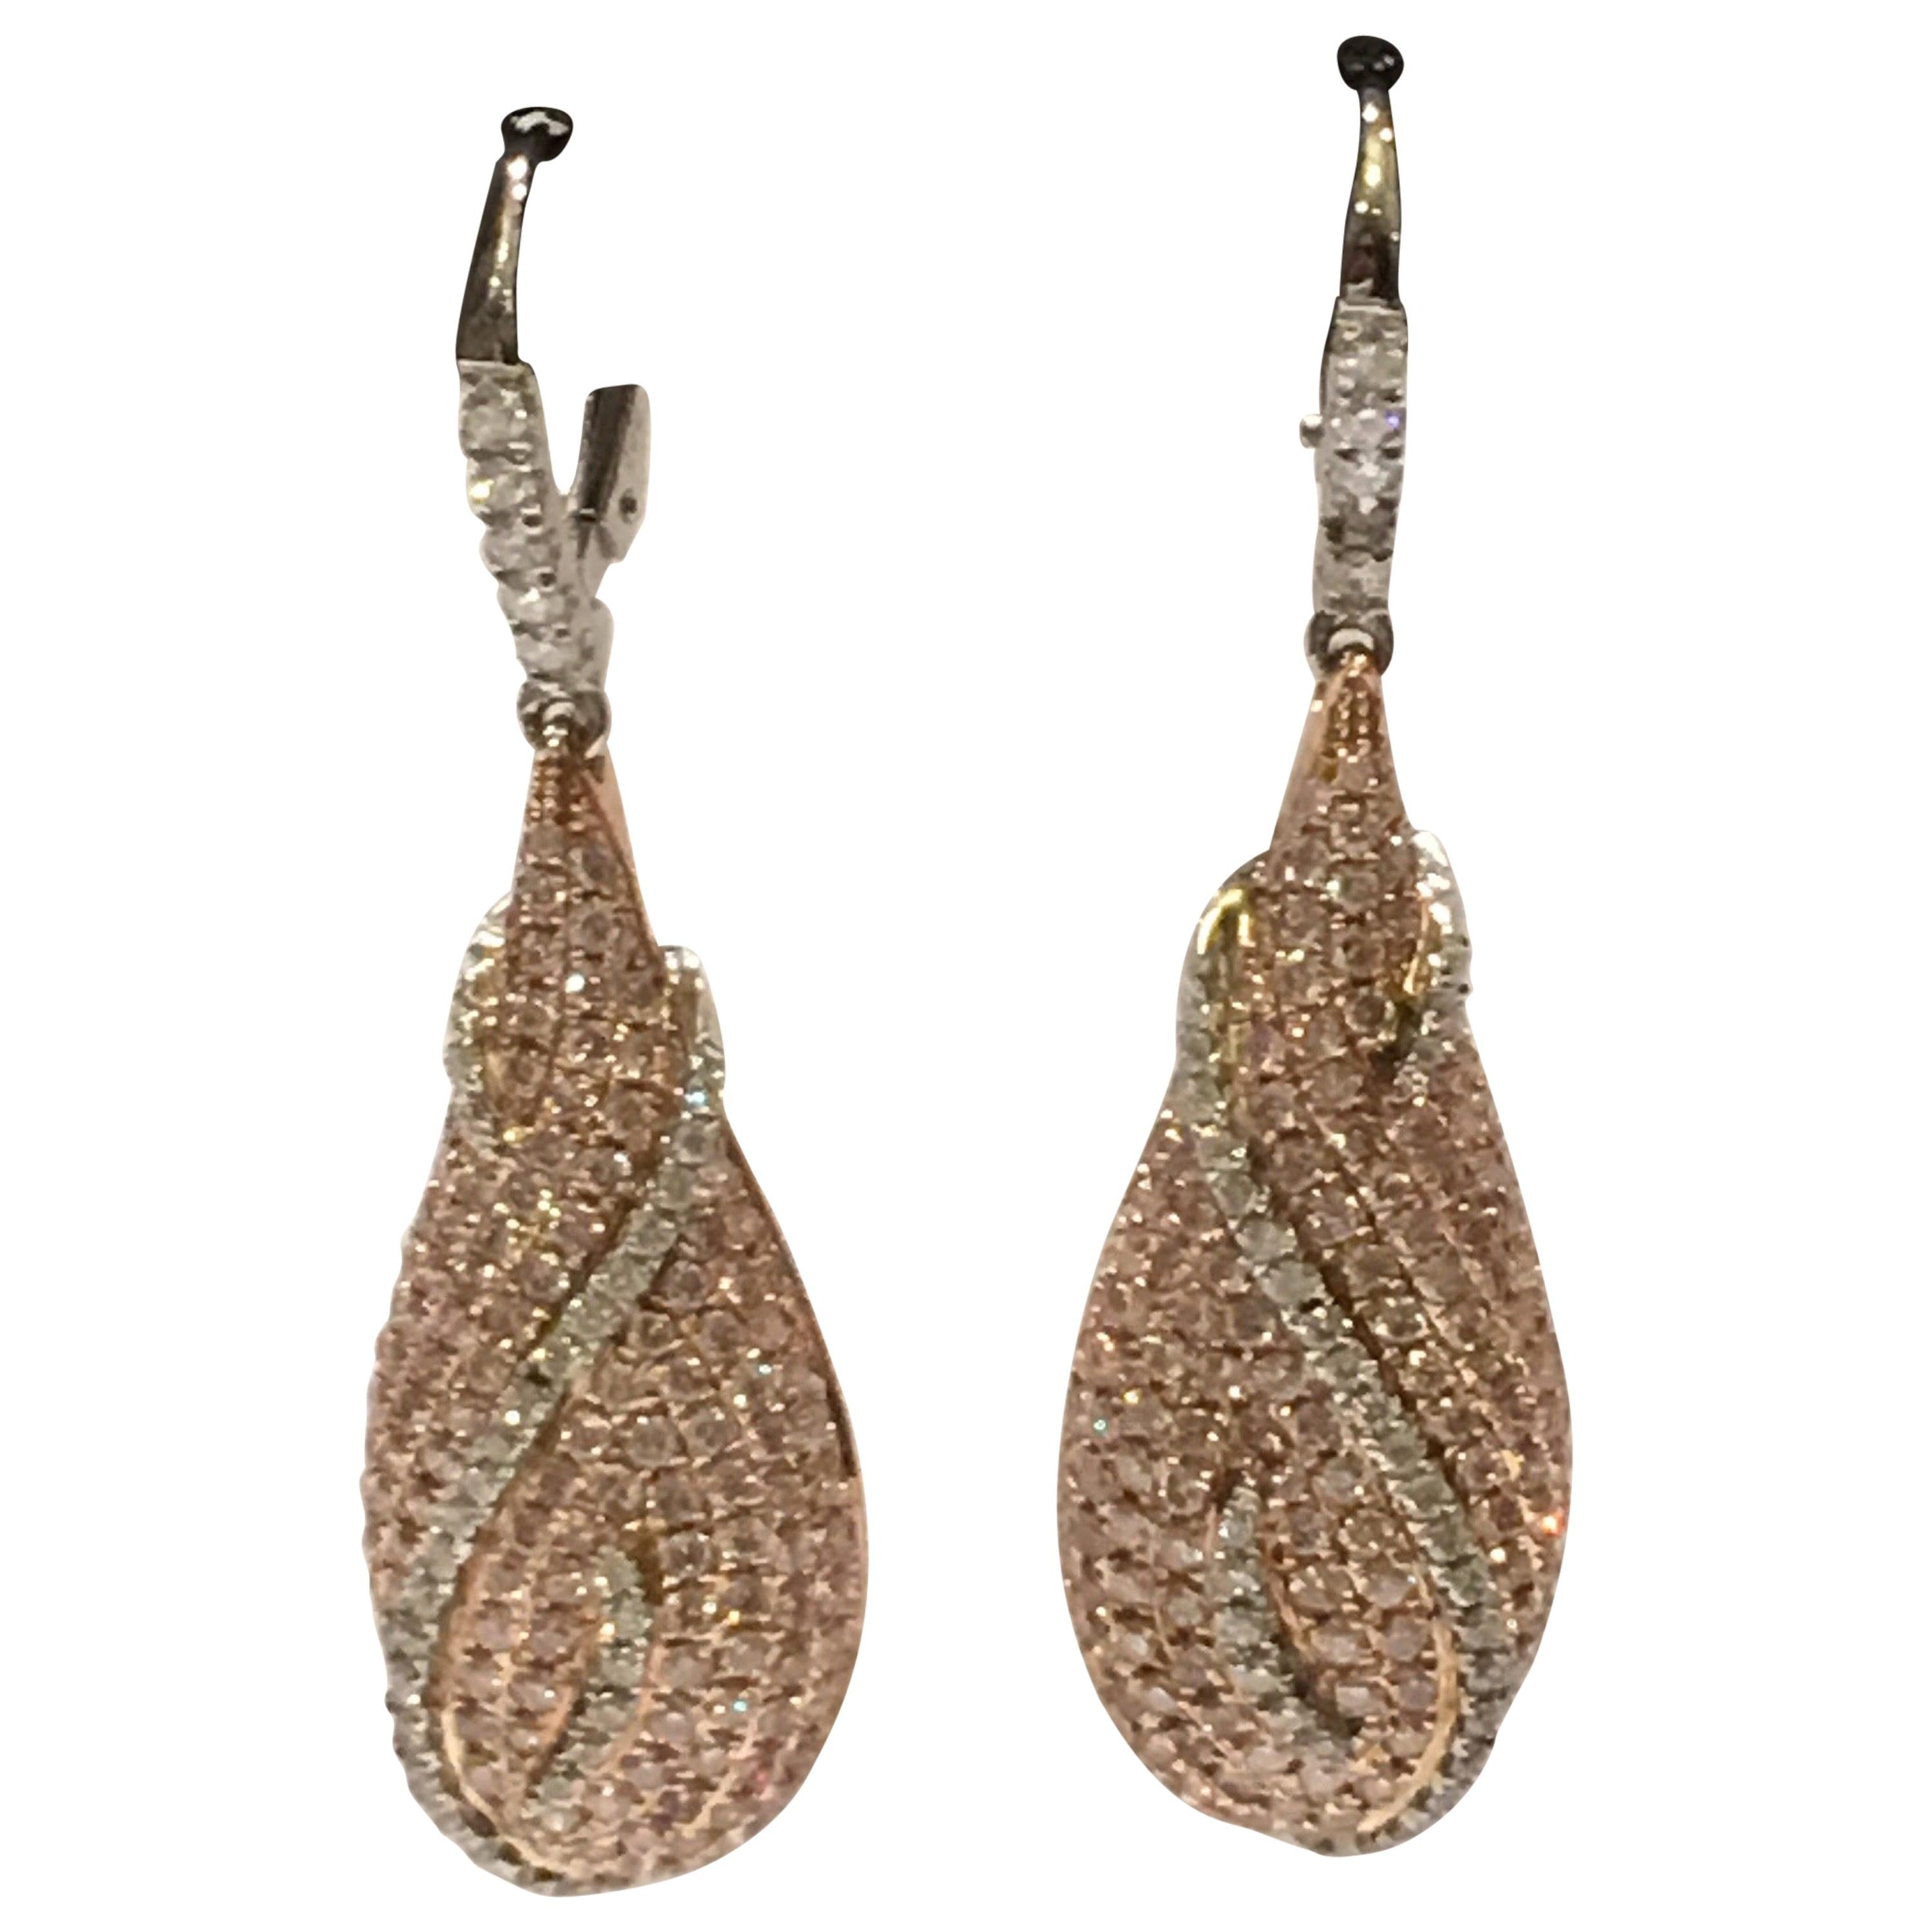 Pink and White Diamonds Set in 14 Karat Two-Tone Gold Earrings